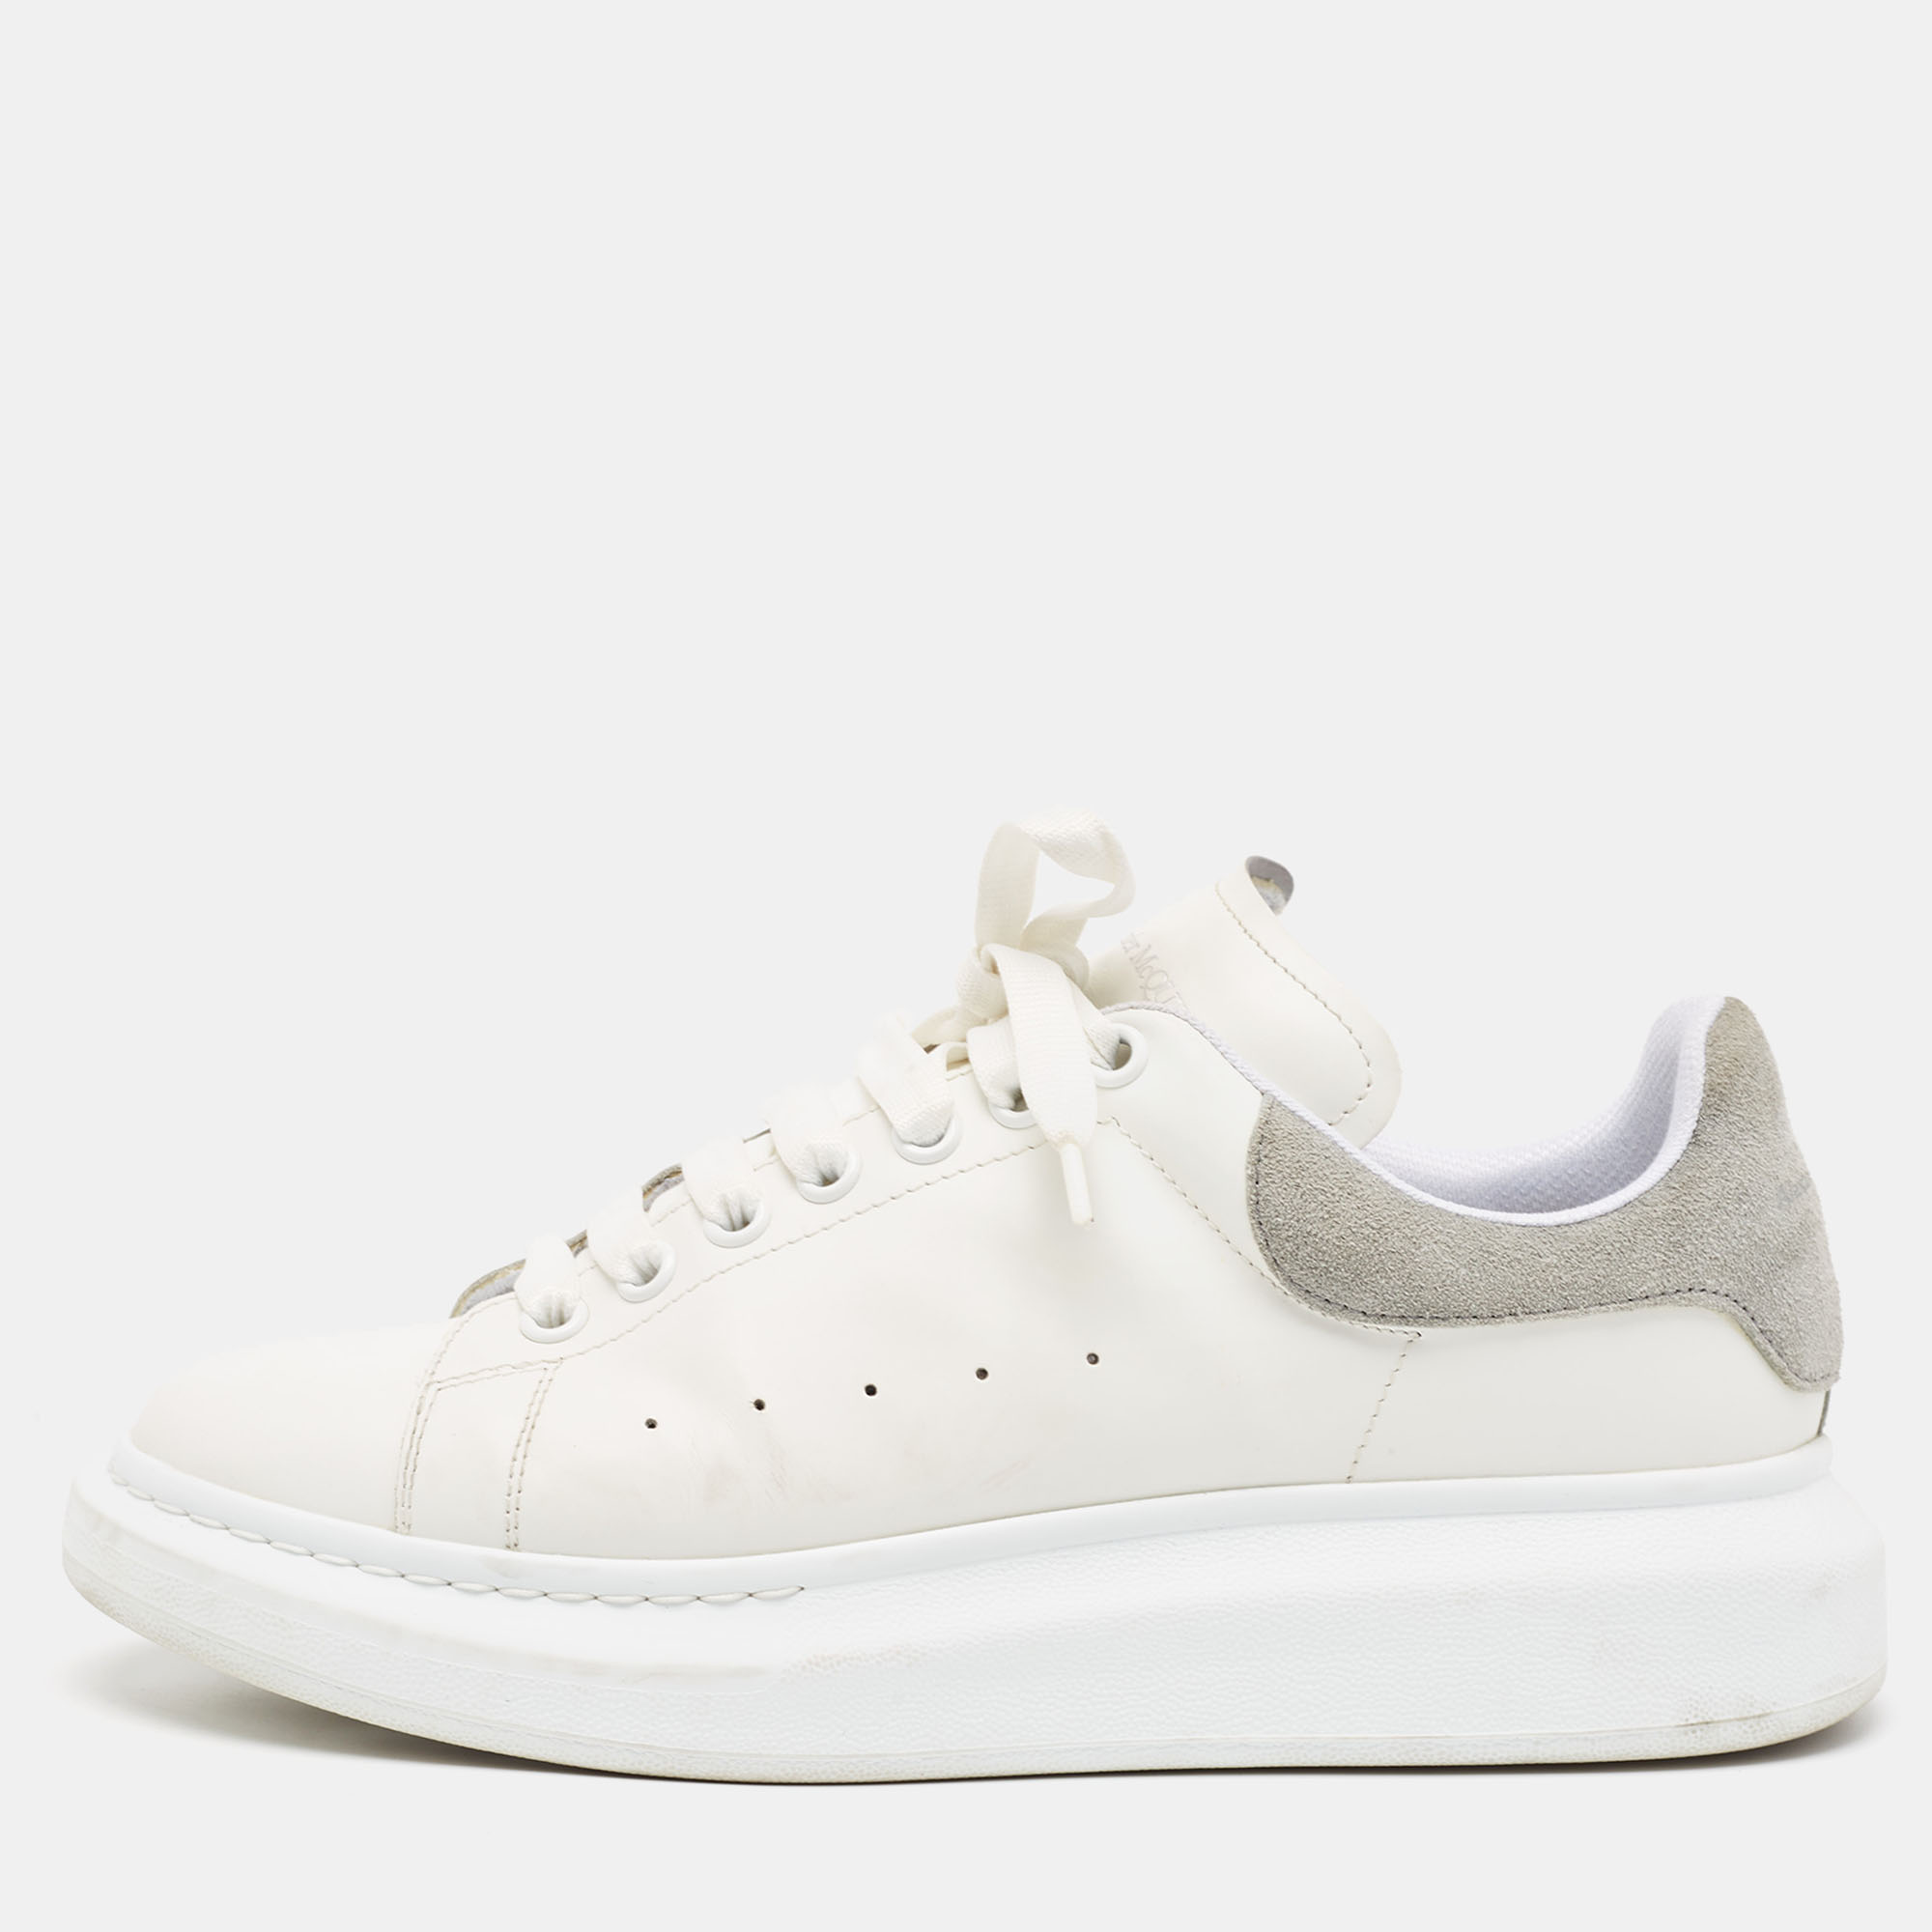 

Alexander McQueen White/Grey Leather and Suede Oversized Sneakers Size